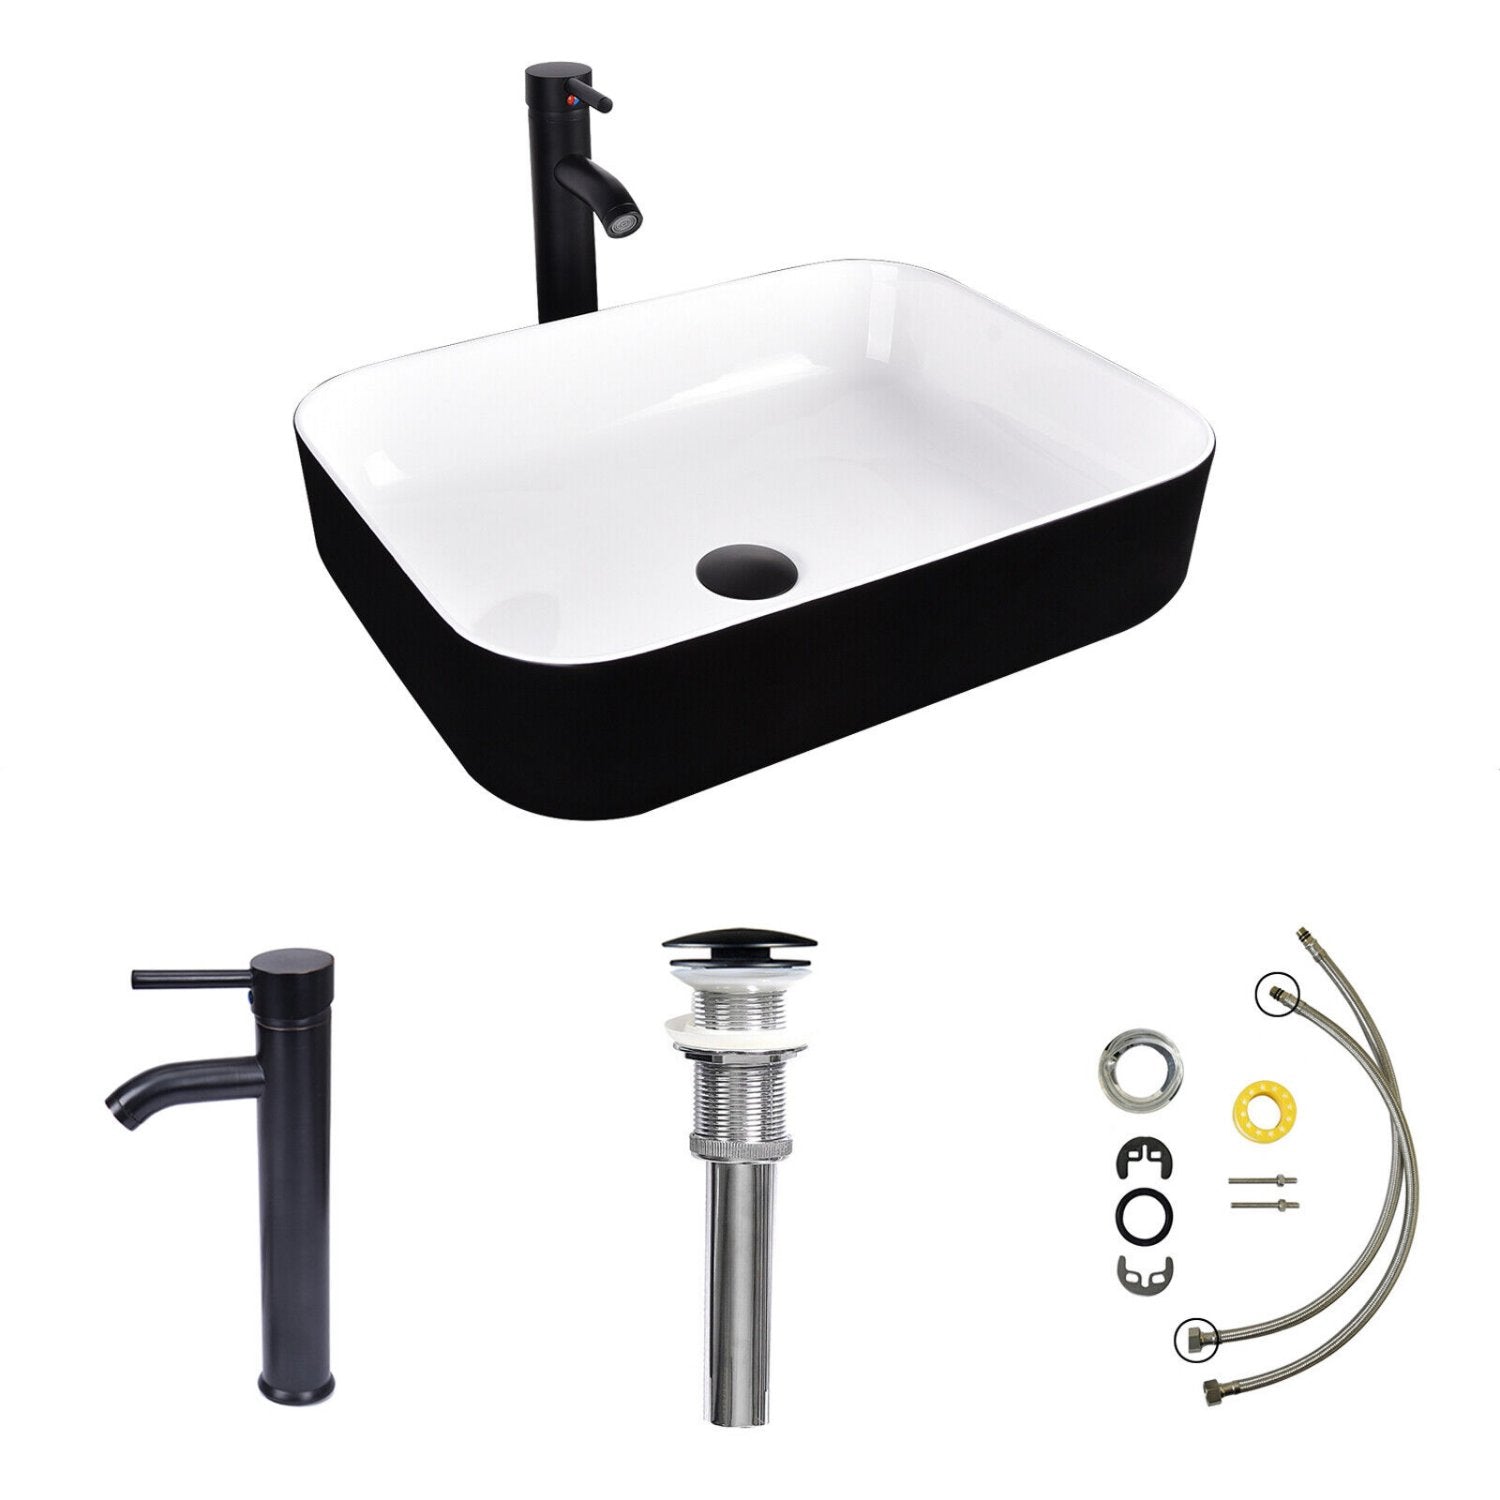 Elecwish squre black and white sink included parts